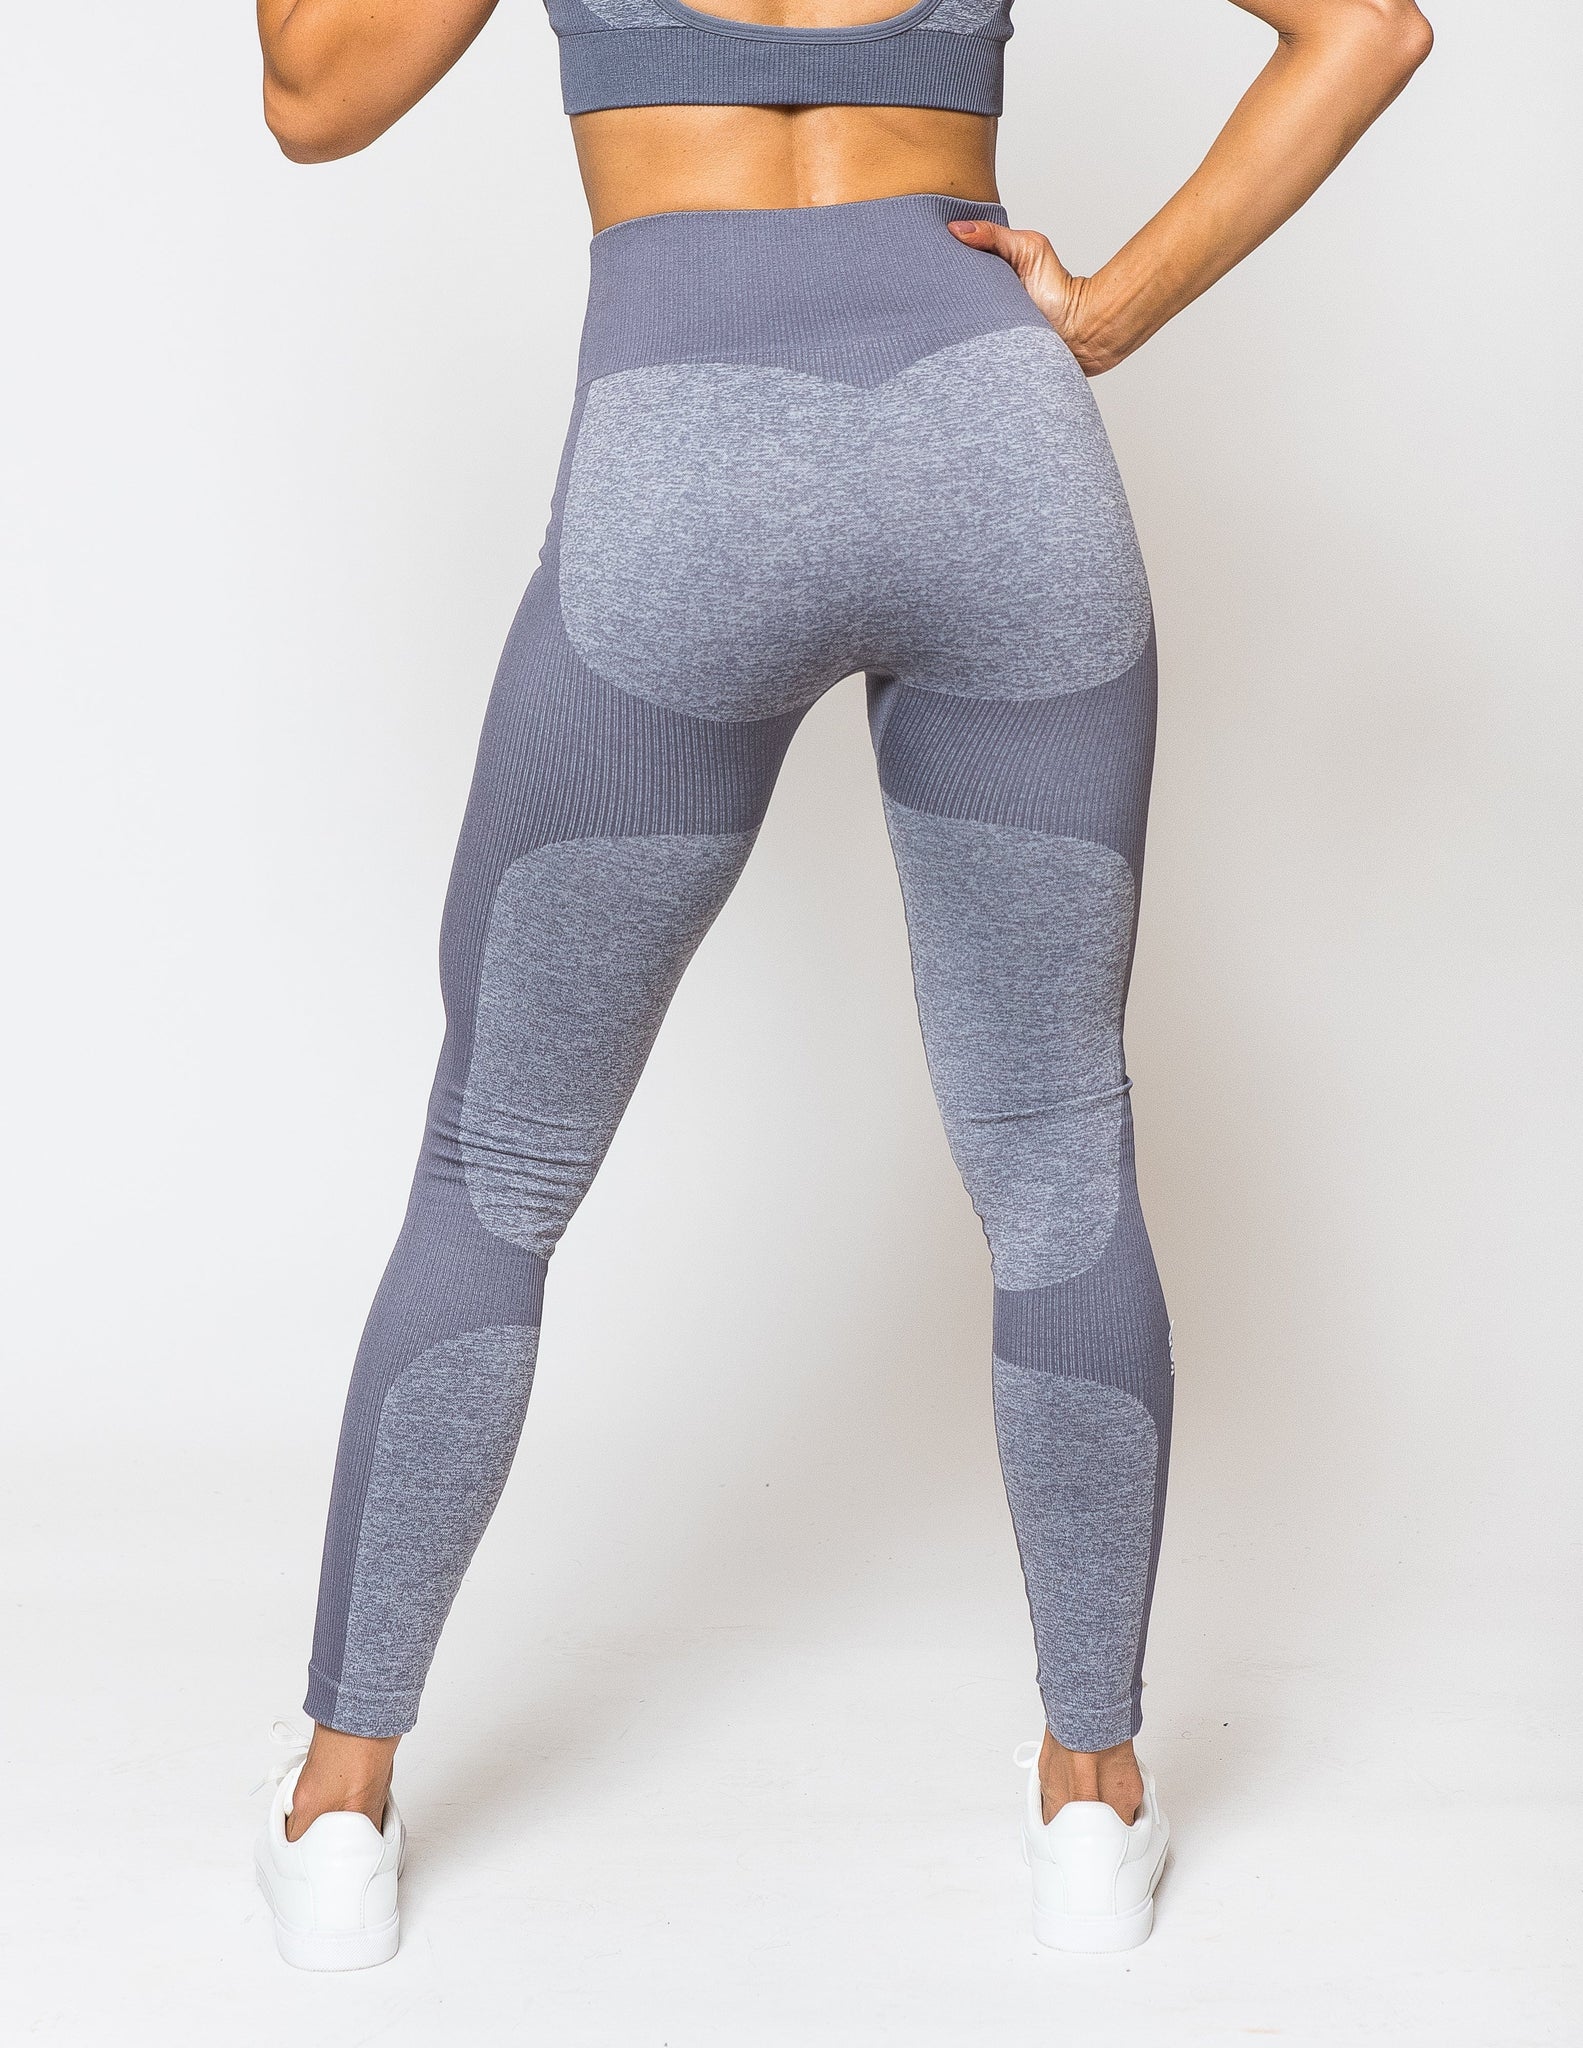 High Waisted Seamless Leggings for Women Tummy Control Workout Gym